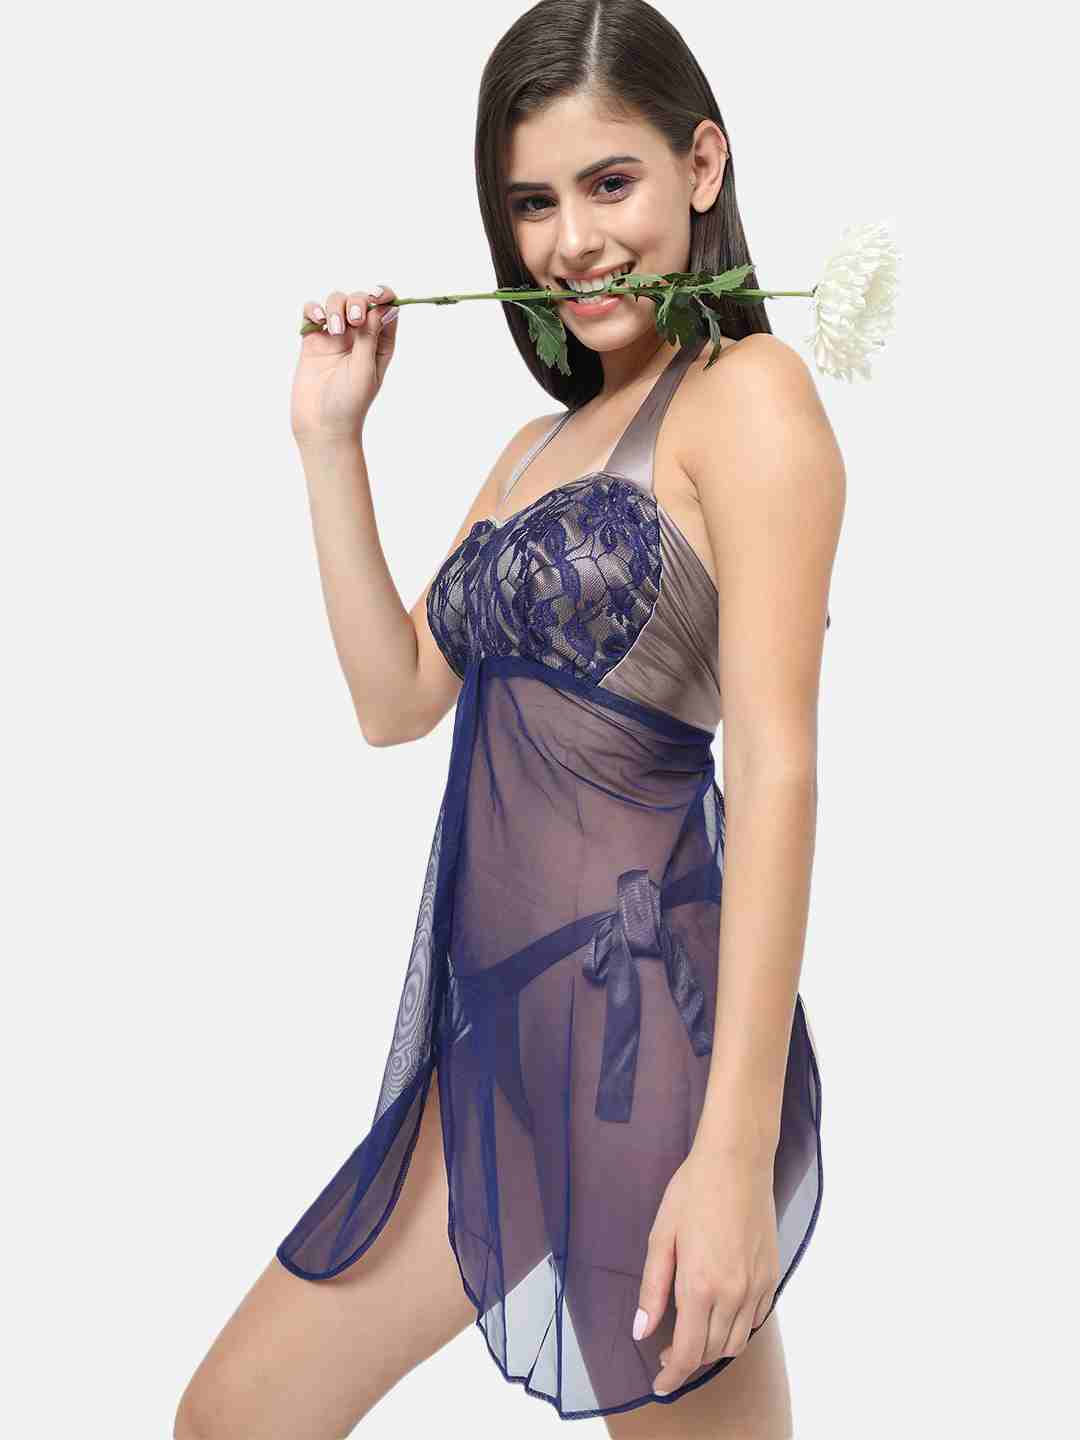 Buy IYARA COLLECTION Women Short Transparent Net Nighty and Lace Lingerie  Bikini Set (Bra-Panty Set) for Honeymoon, Wedding Night, Bedroom, Special  Nights at Amazon.in